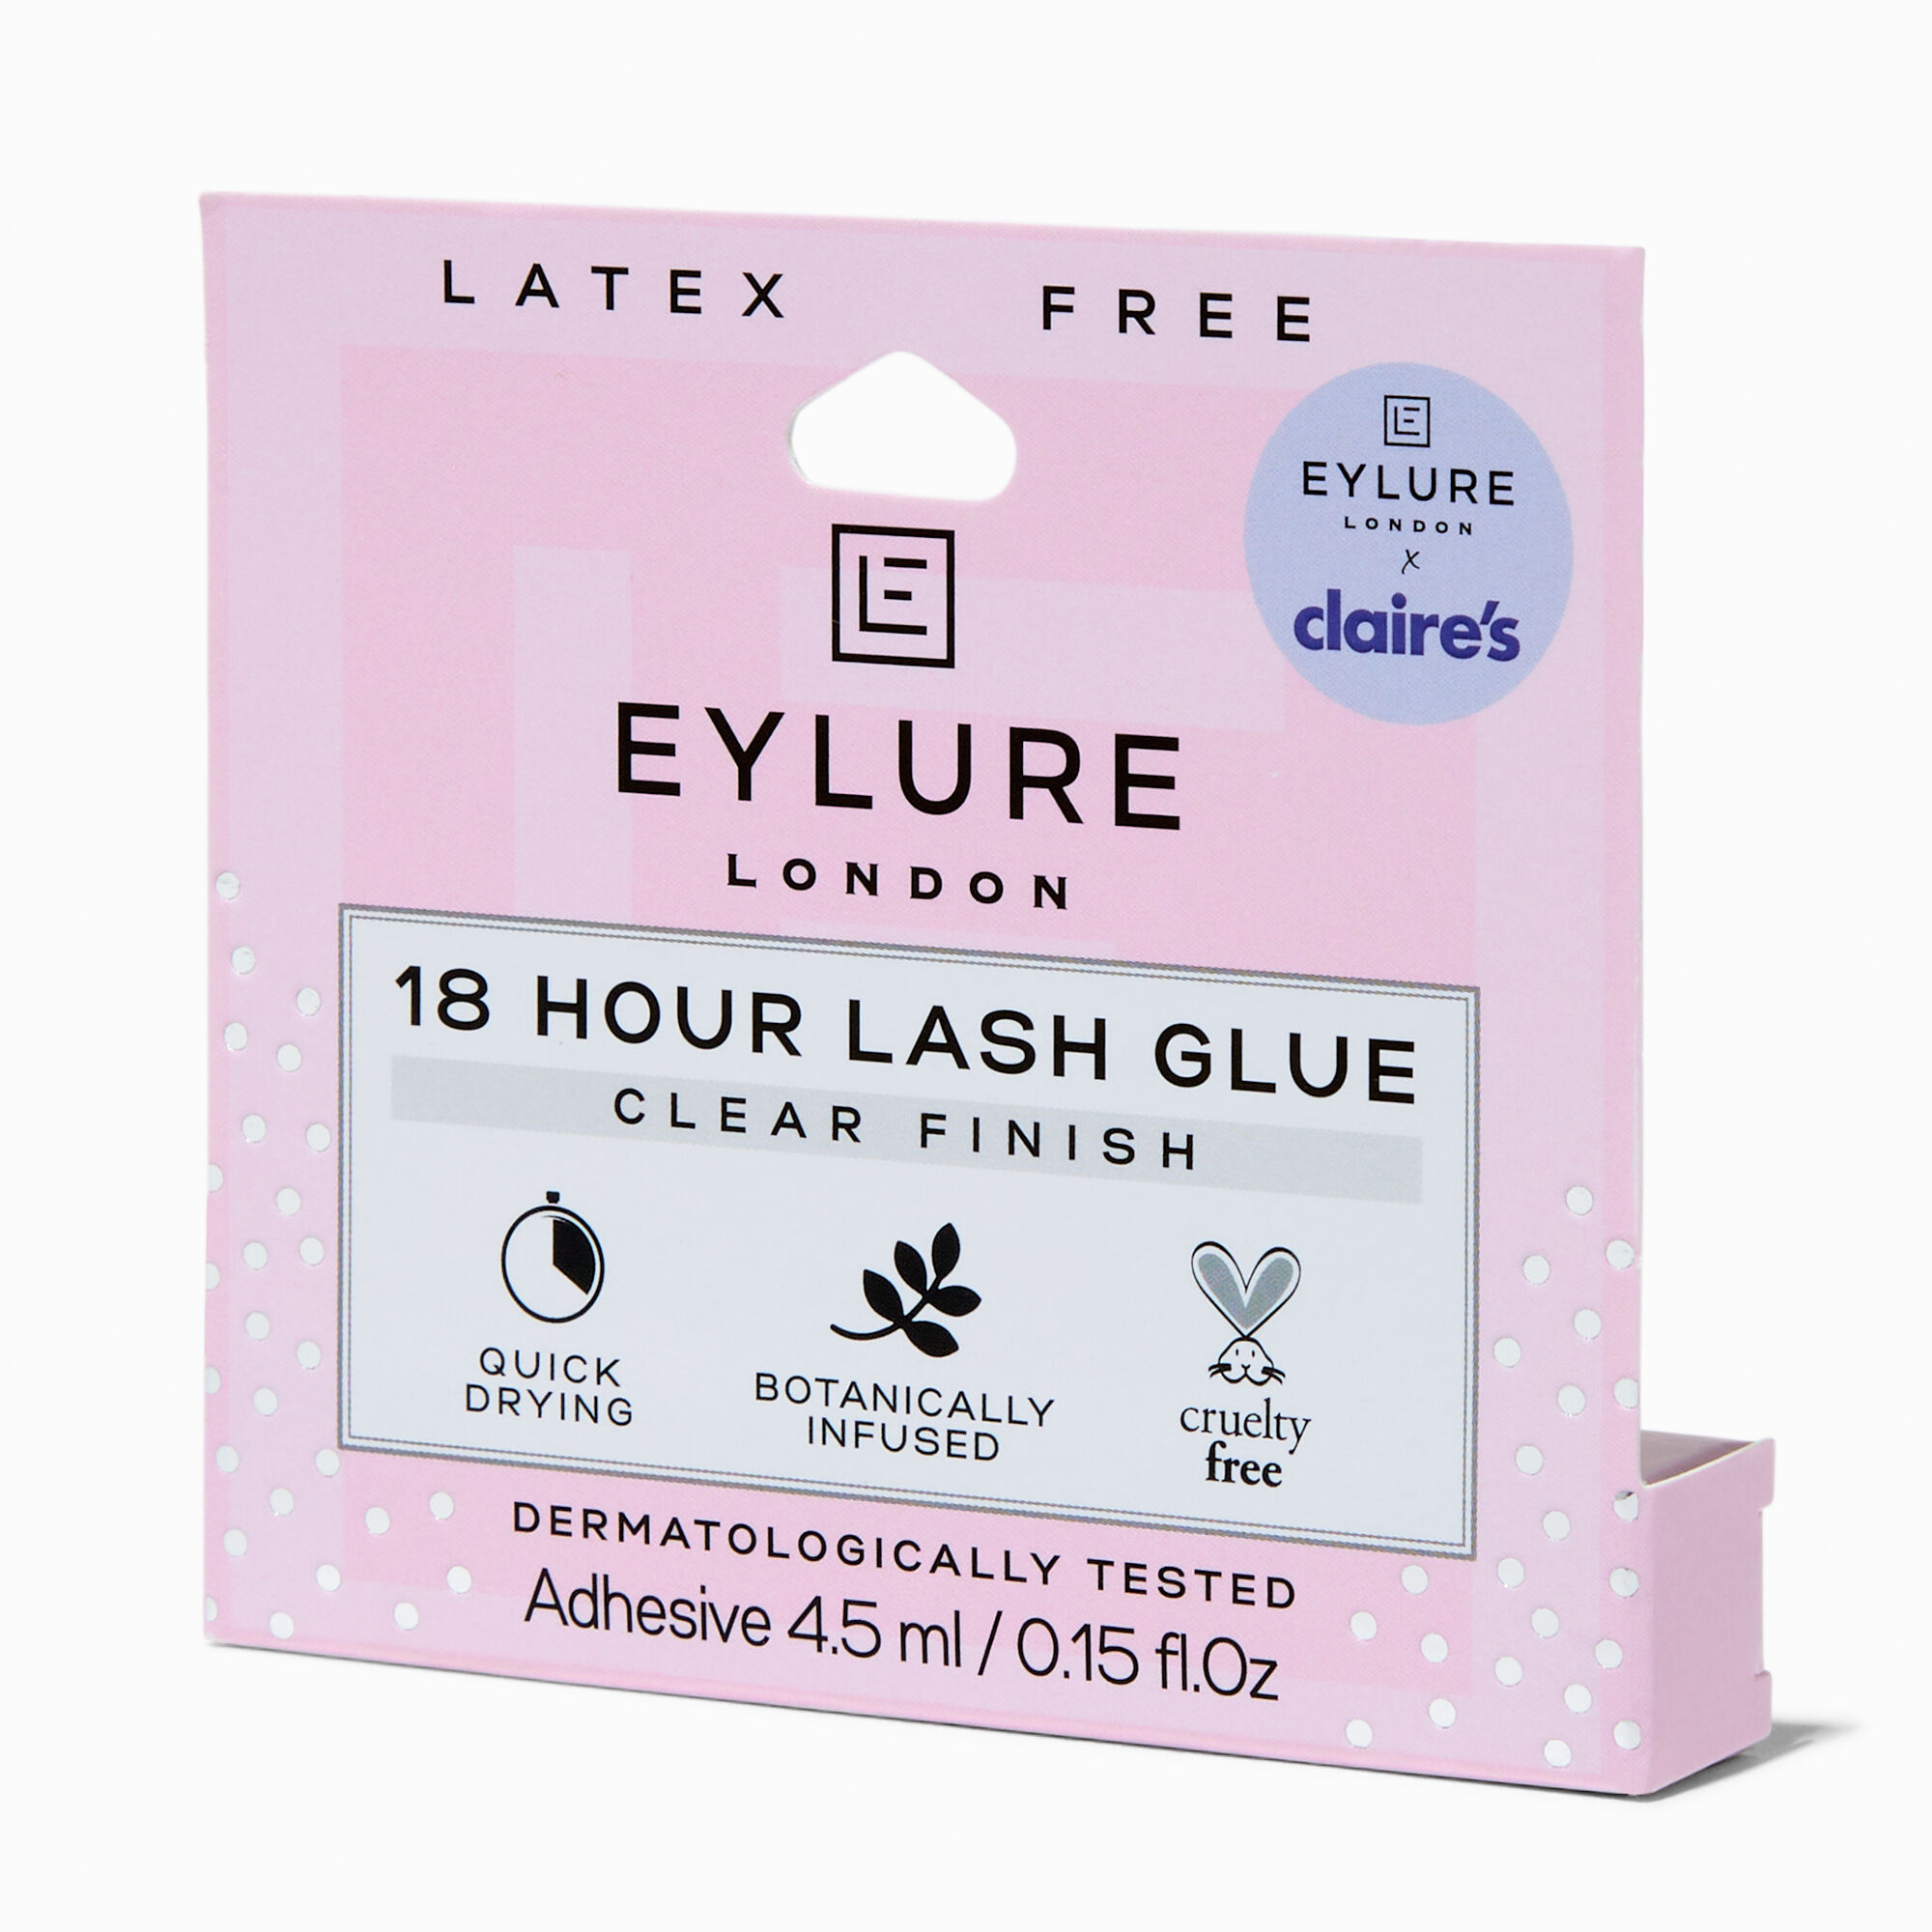 View Eylure Claires Exclusive 18 Hour Lash Glue Clear Green information